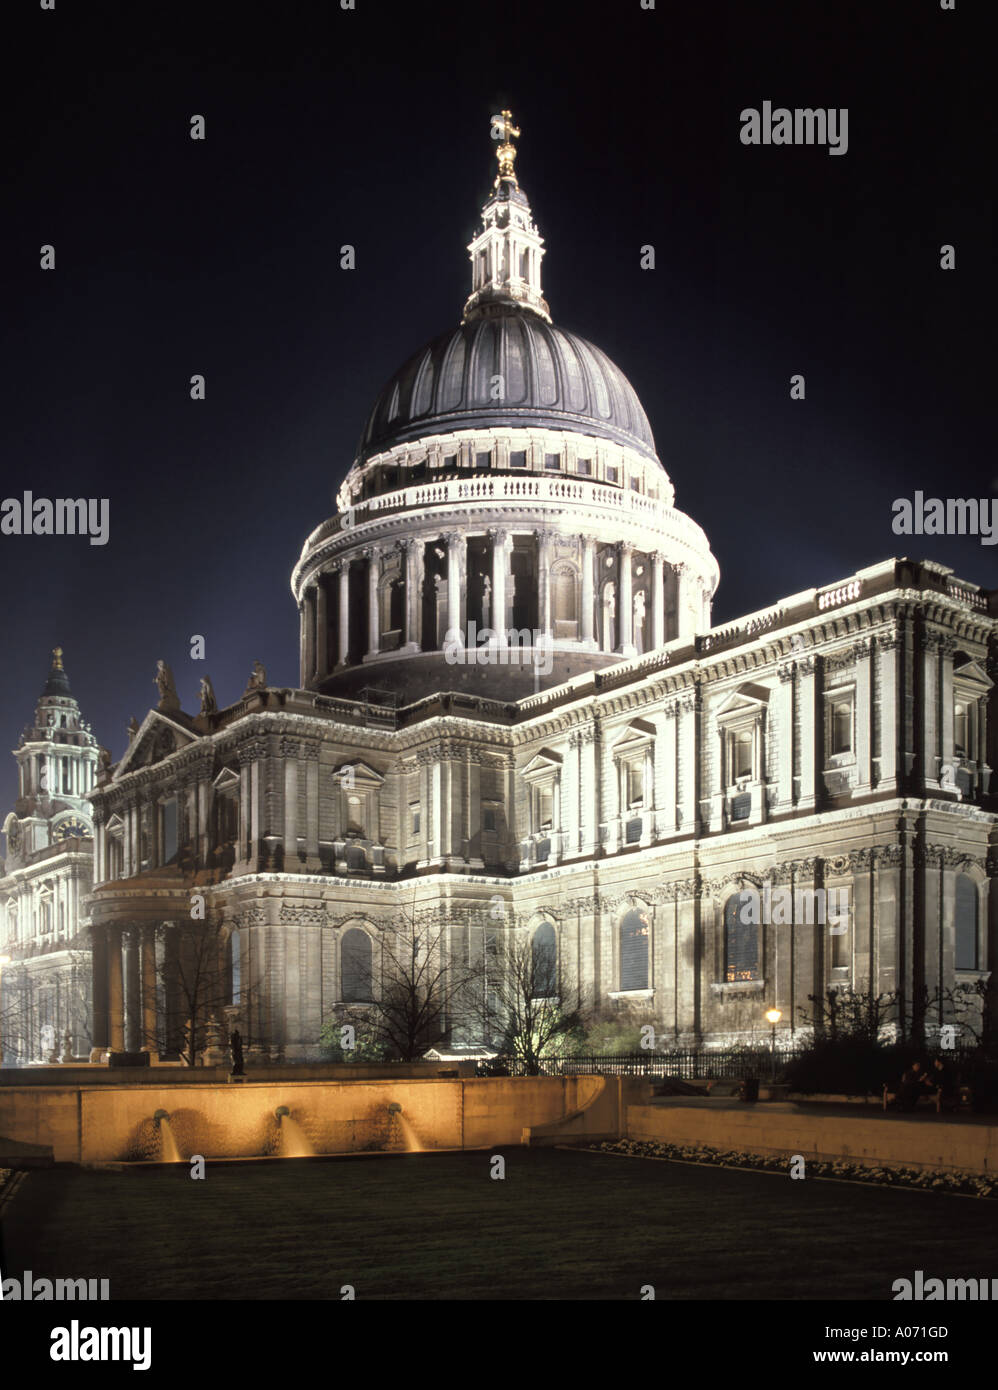 Night street scene City of London floodlit fountain & floodlights Sir Christopher Wren iconic historical dome St Pauls cathedral building England UK Stock Photo